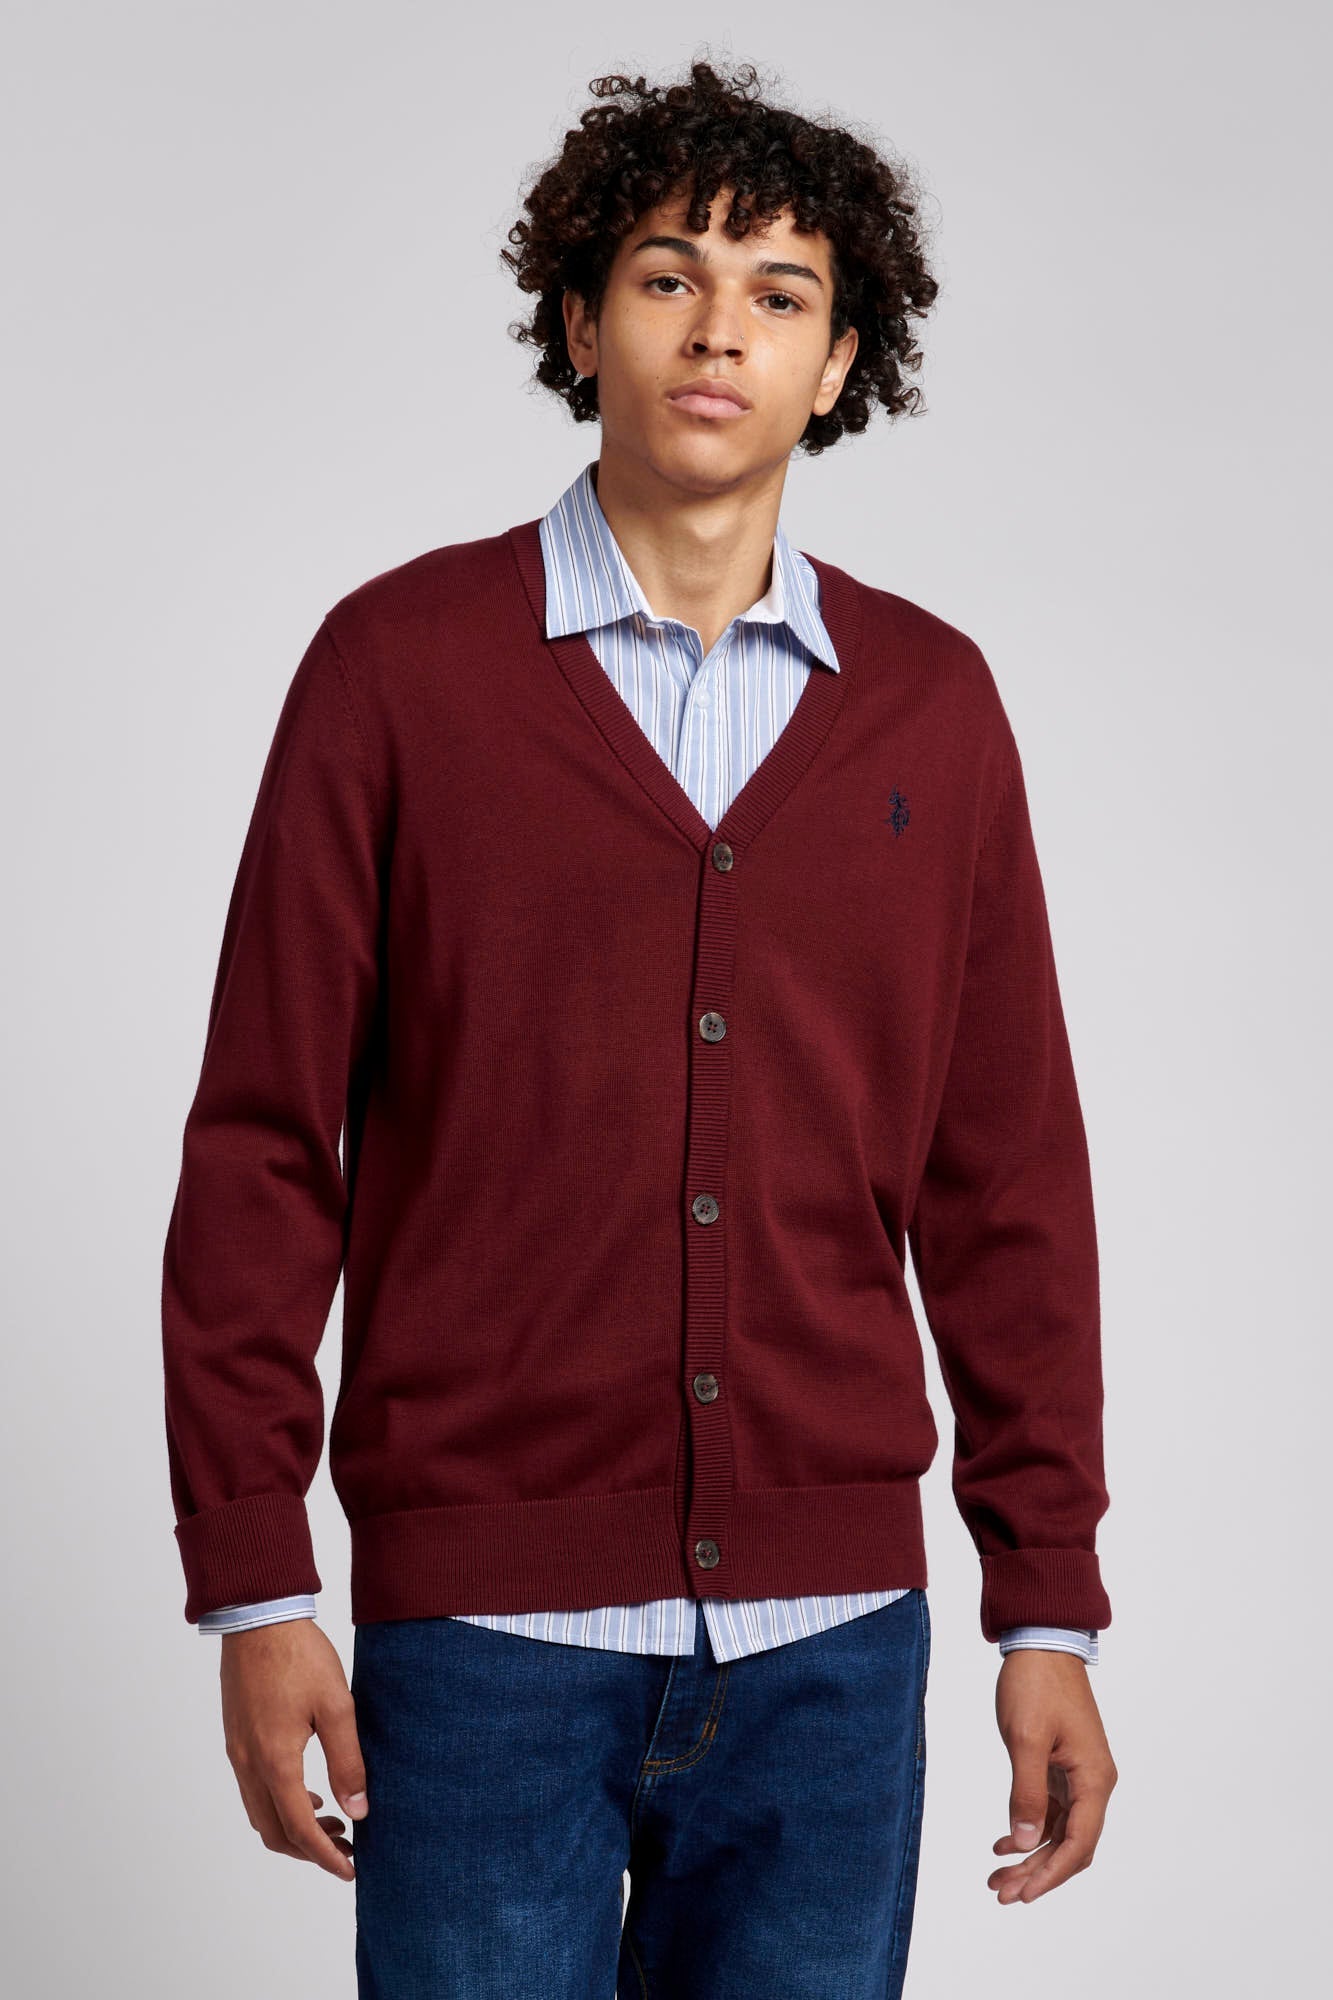 U.S. Polo Assn. Mens Knitted Cardigan in Windsor Wine